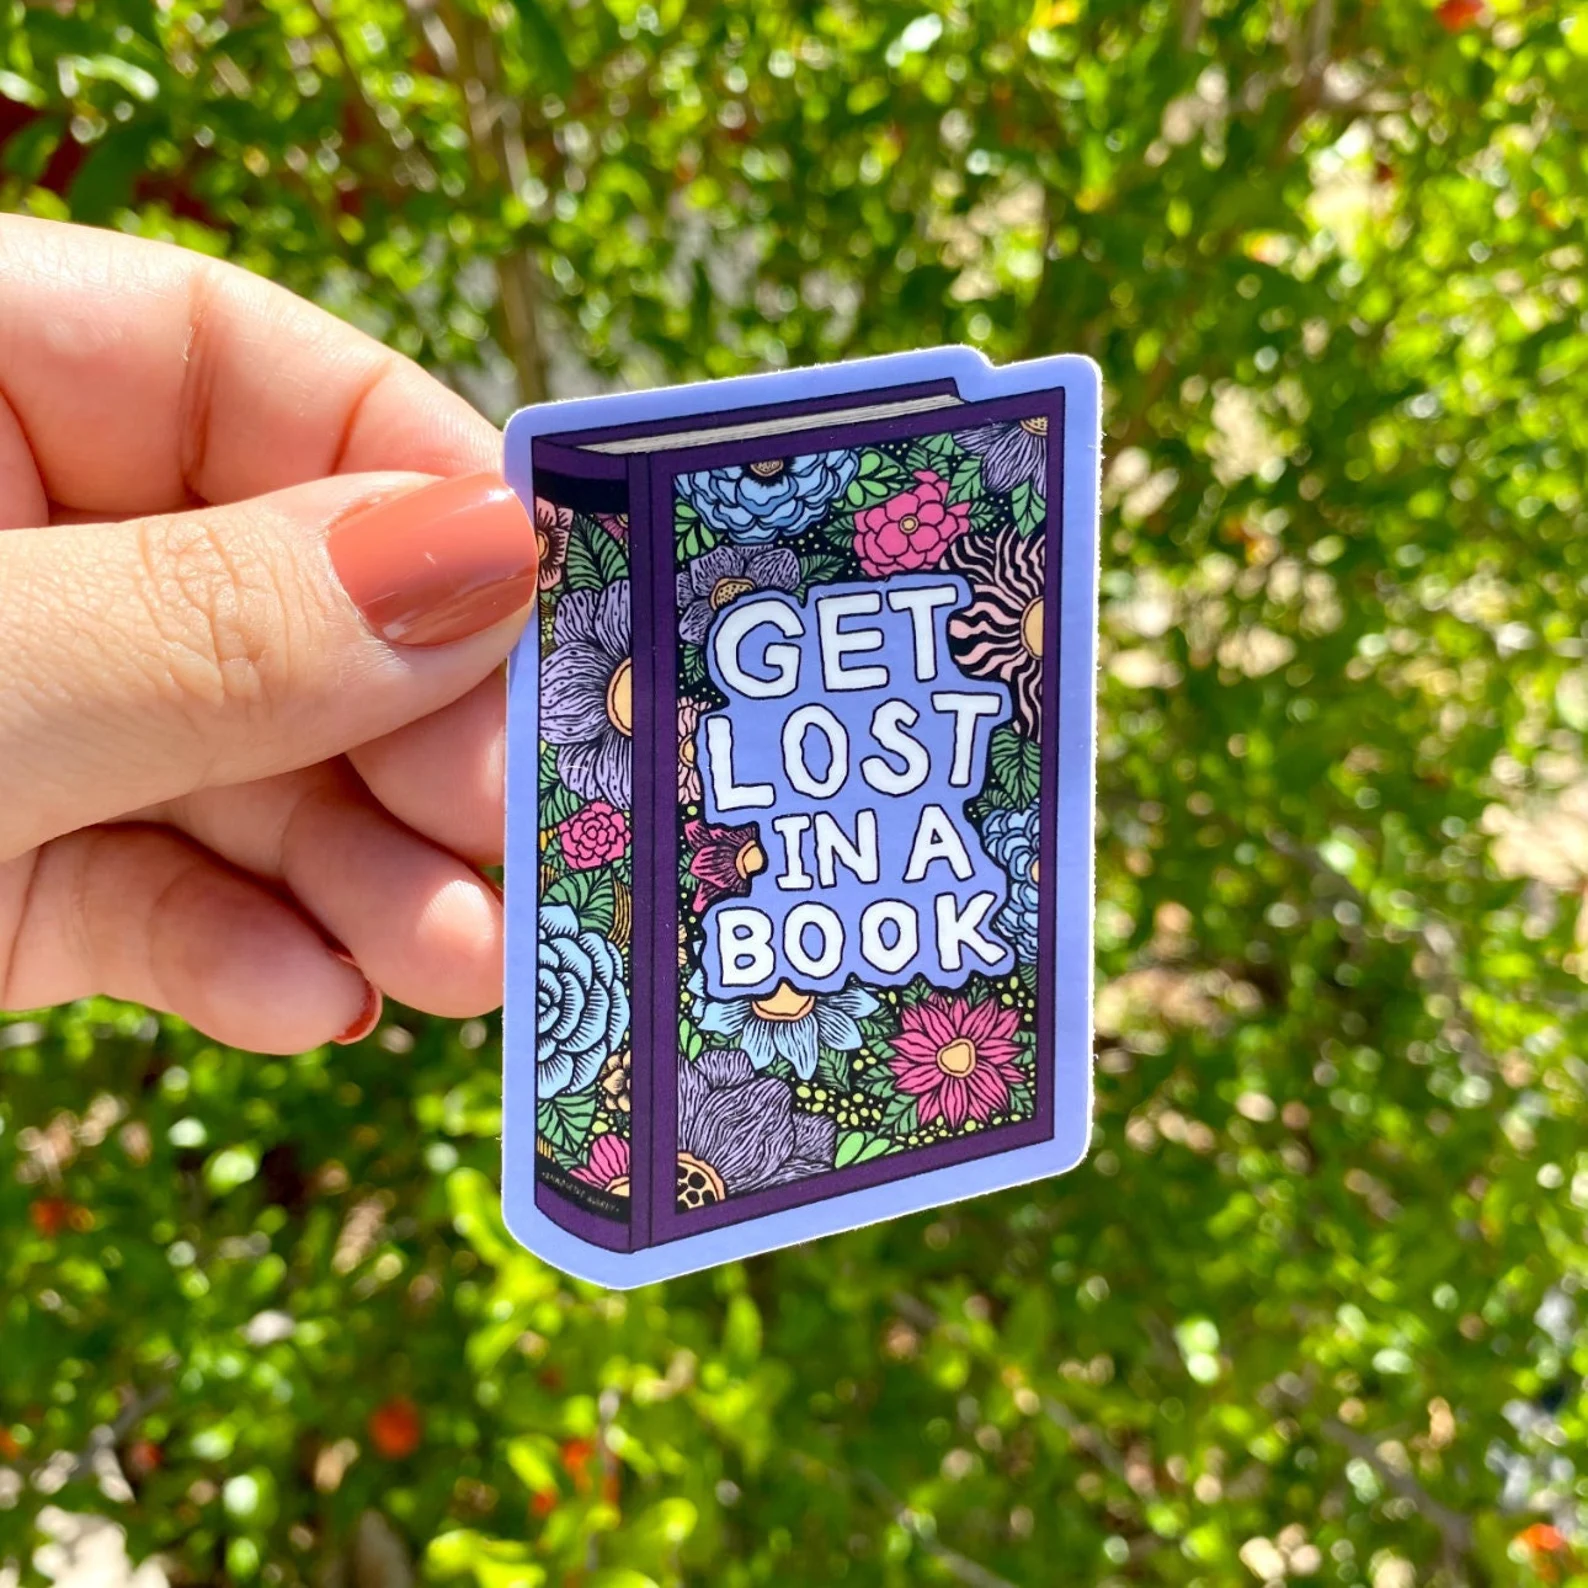 Image of a floral book sticker being held by a white hand. The text on the sticker says "get lost in a book."